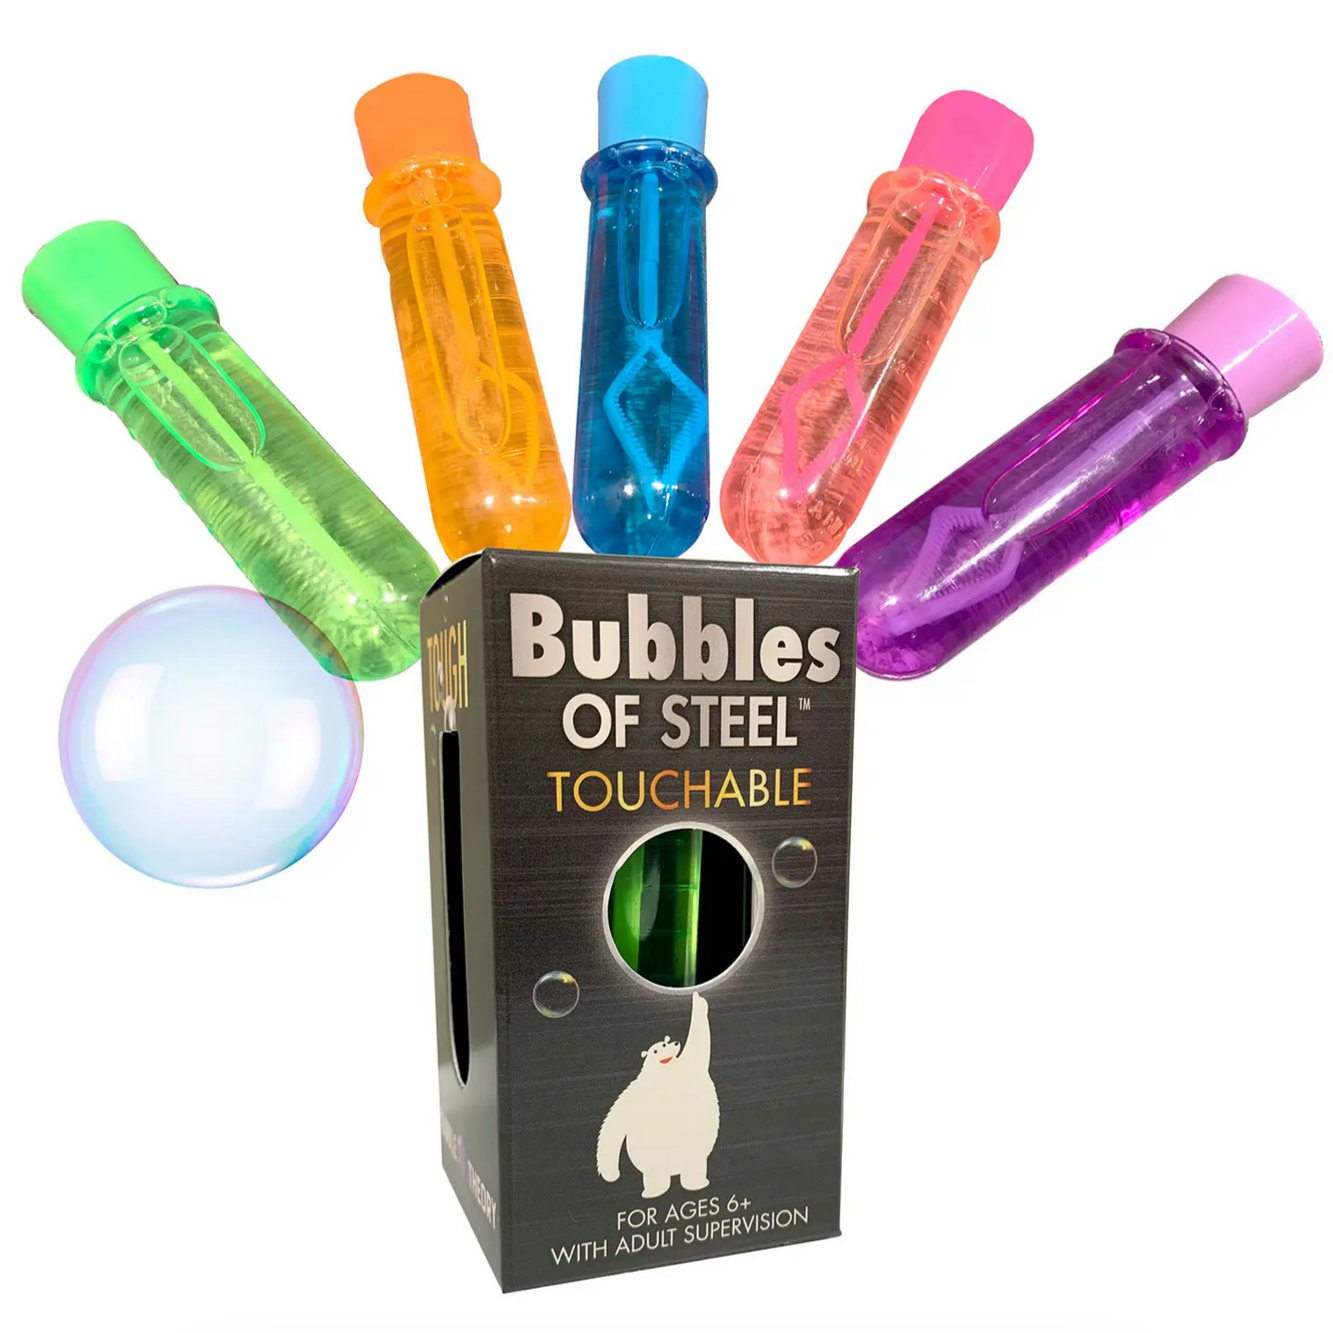 Bubbles of Steel: Touchable and Heroic Bubbles (4-14yrs)